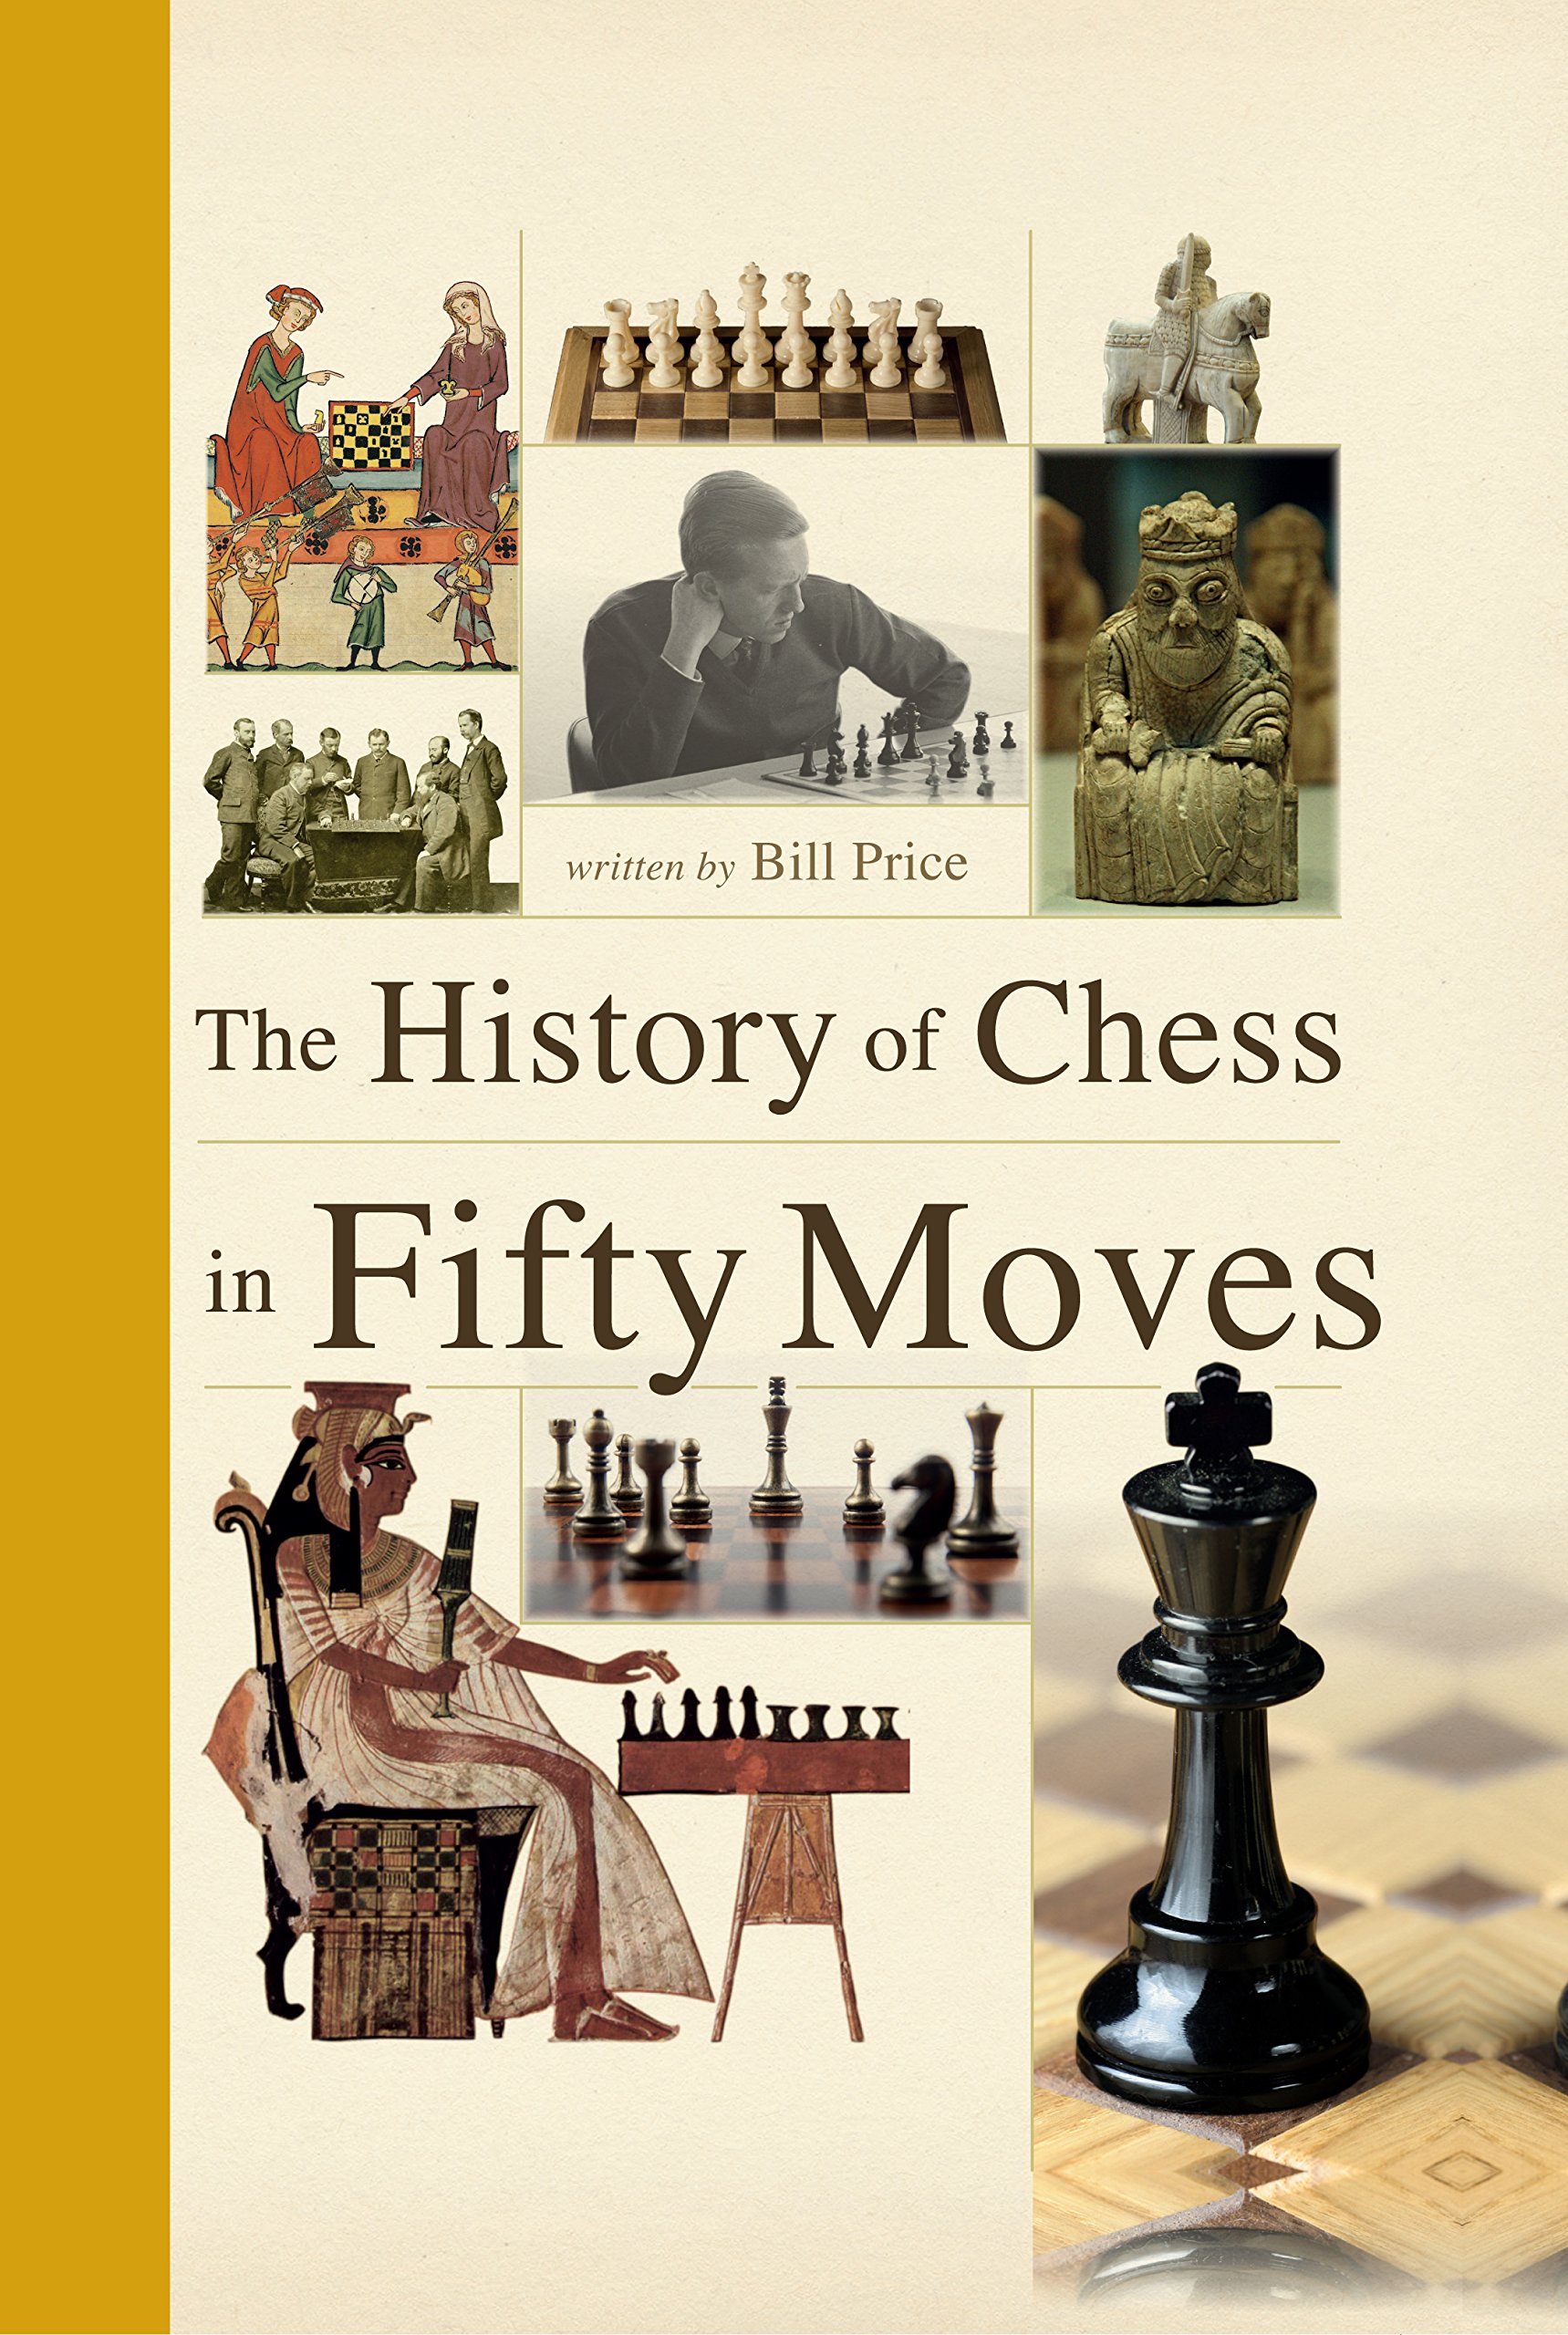 Brief notes on the history of Chess 1600